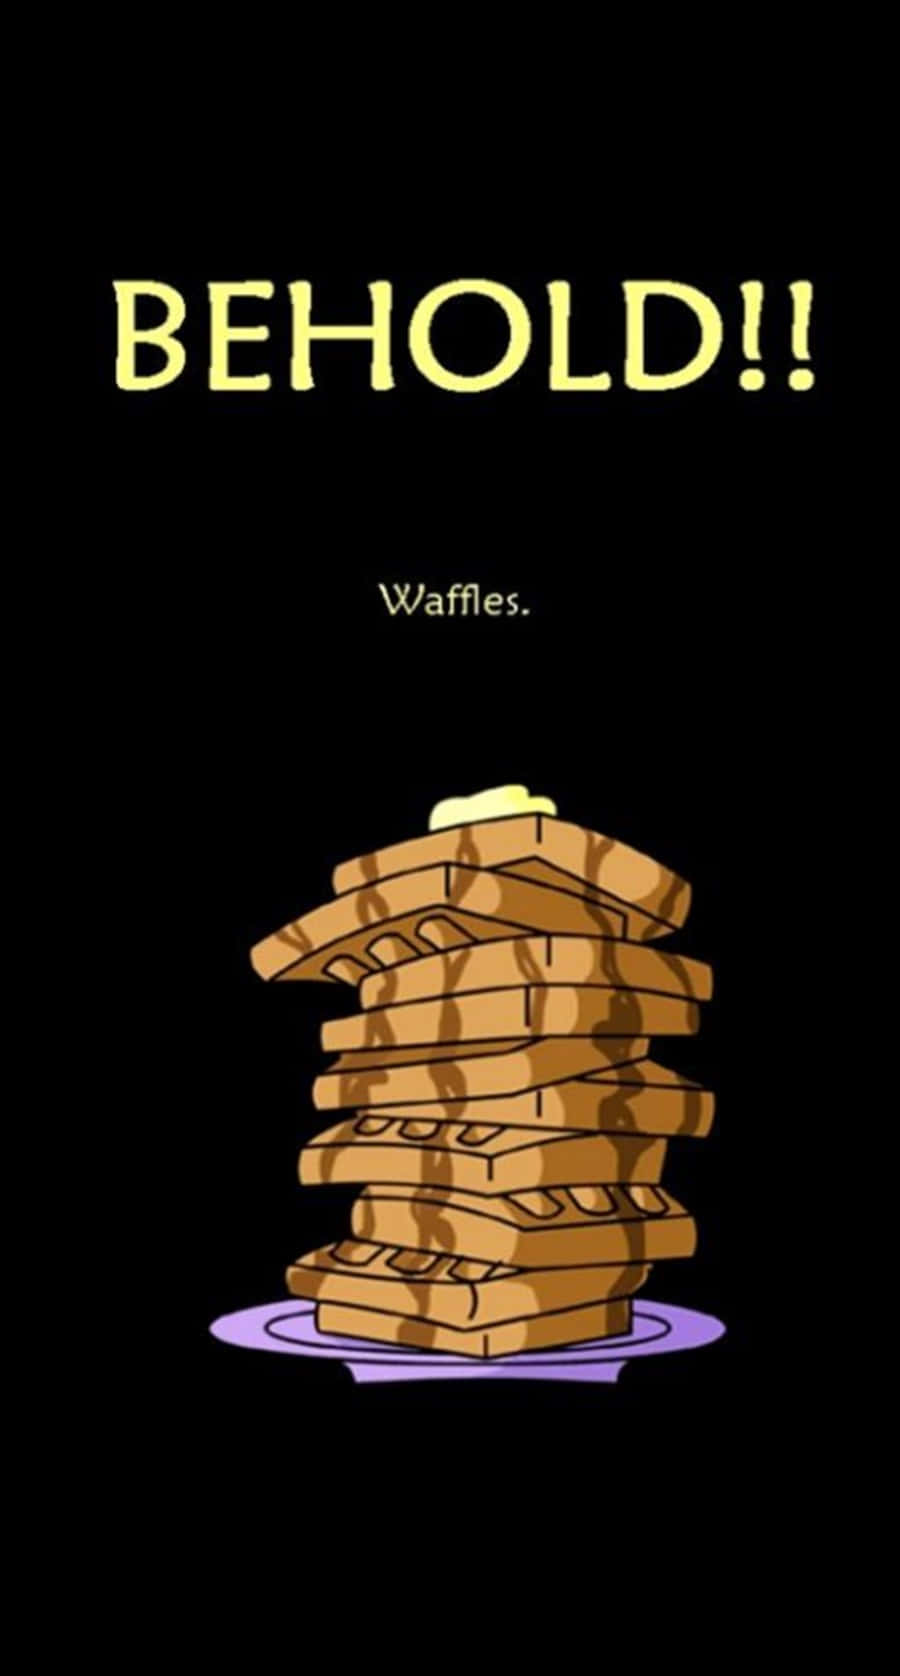 Stack Of Waffles Funny Adult Phone Wallpaper